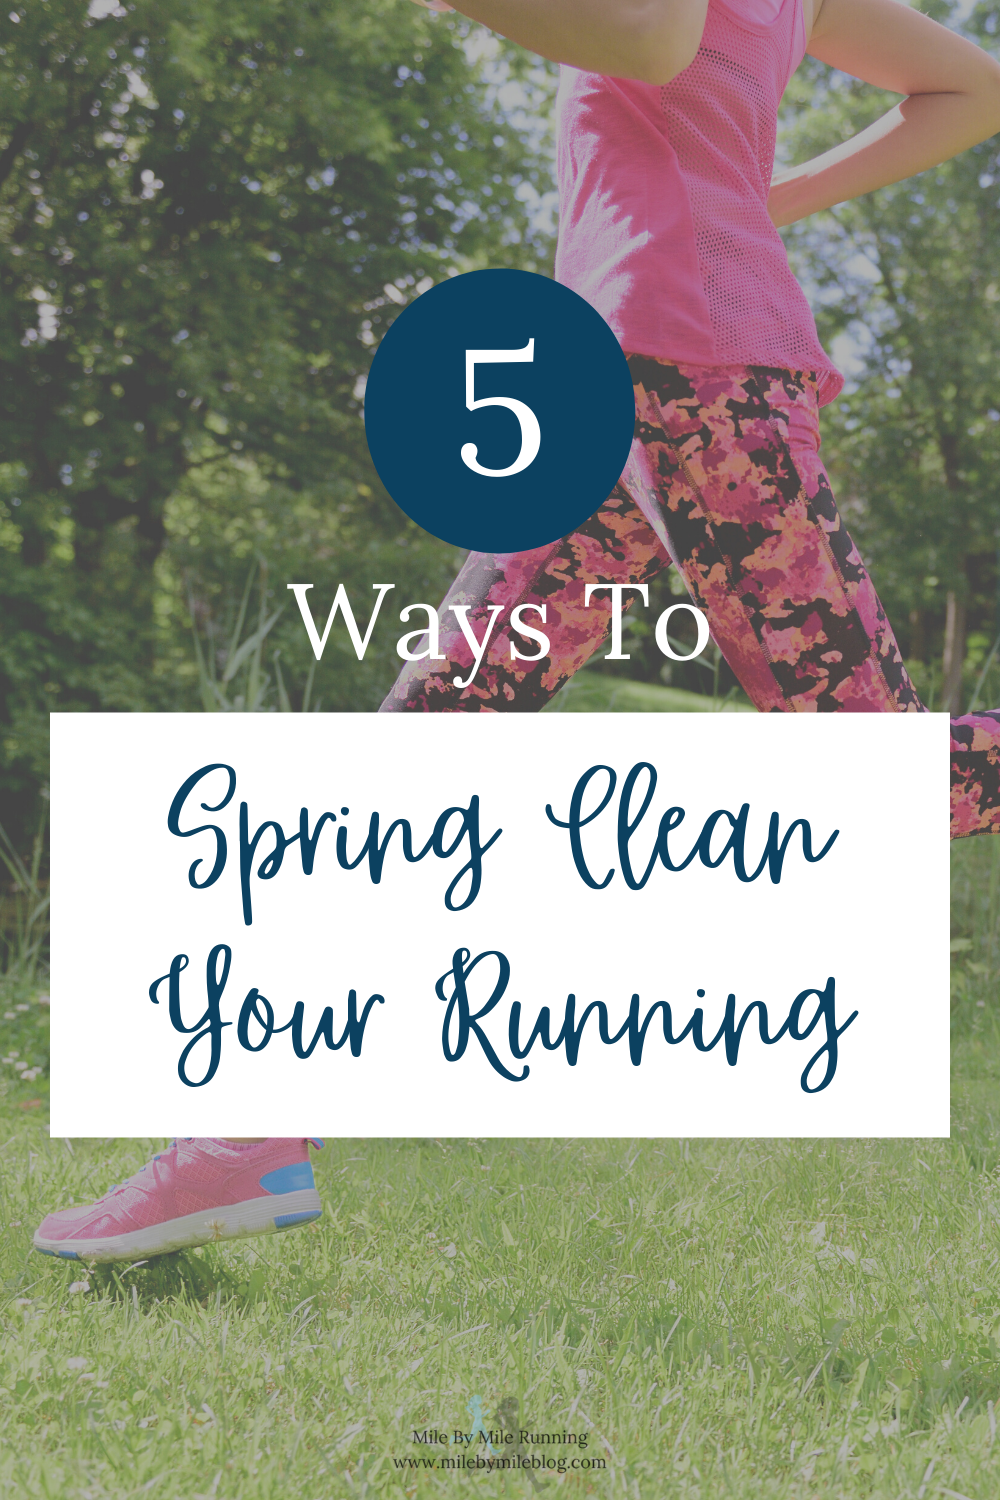 After a long, cold winter, is anyone else feeling like they need a good spring cleaning? Every year around this time I start to get excited for shorts, warmer running weather, and potential spring races. So why not take some time to "spring clean" your running? This is a great way to reset and refocus before spring running really begins!